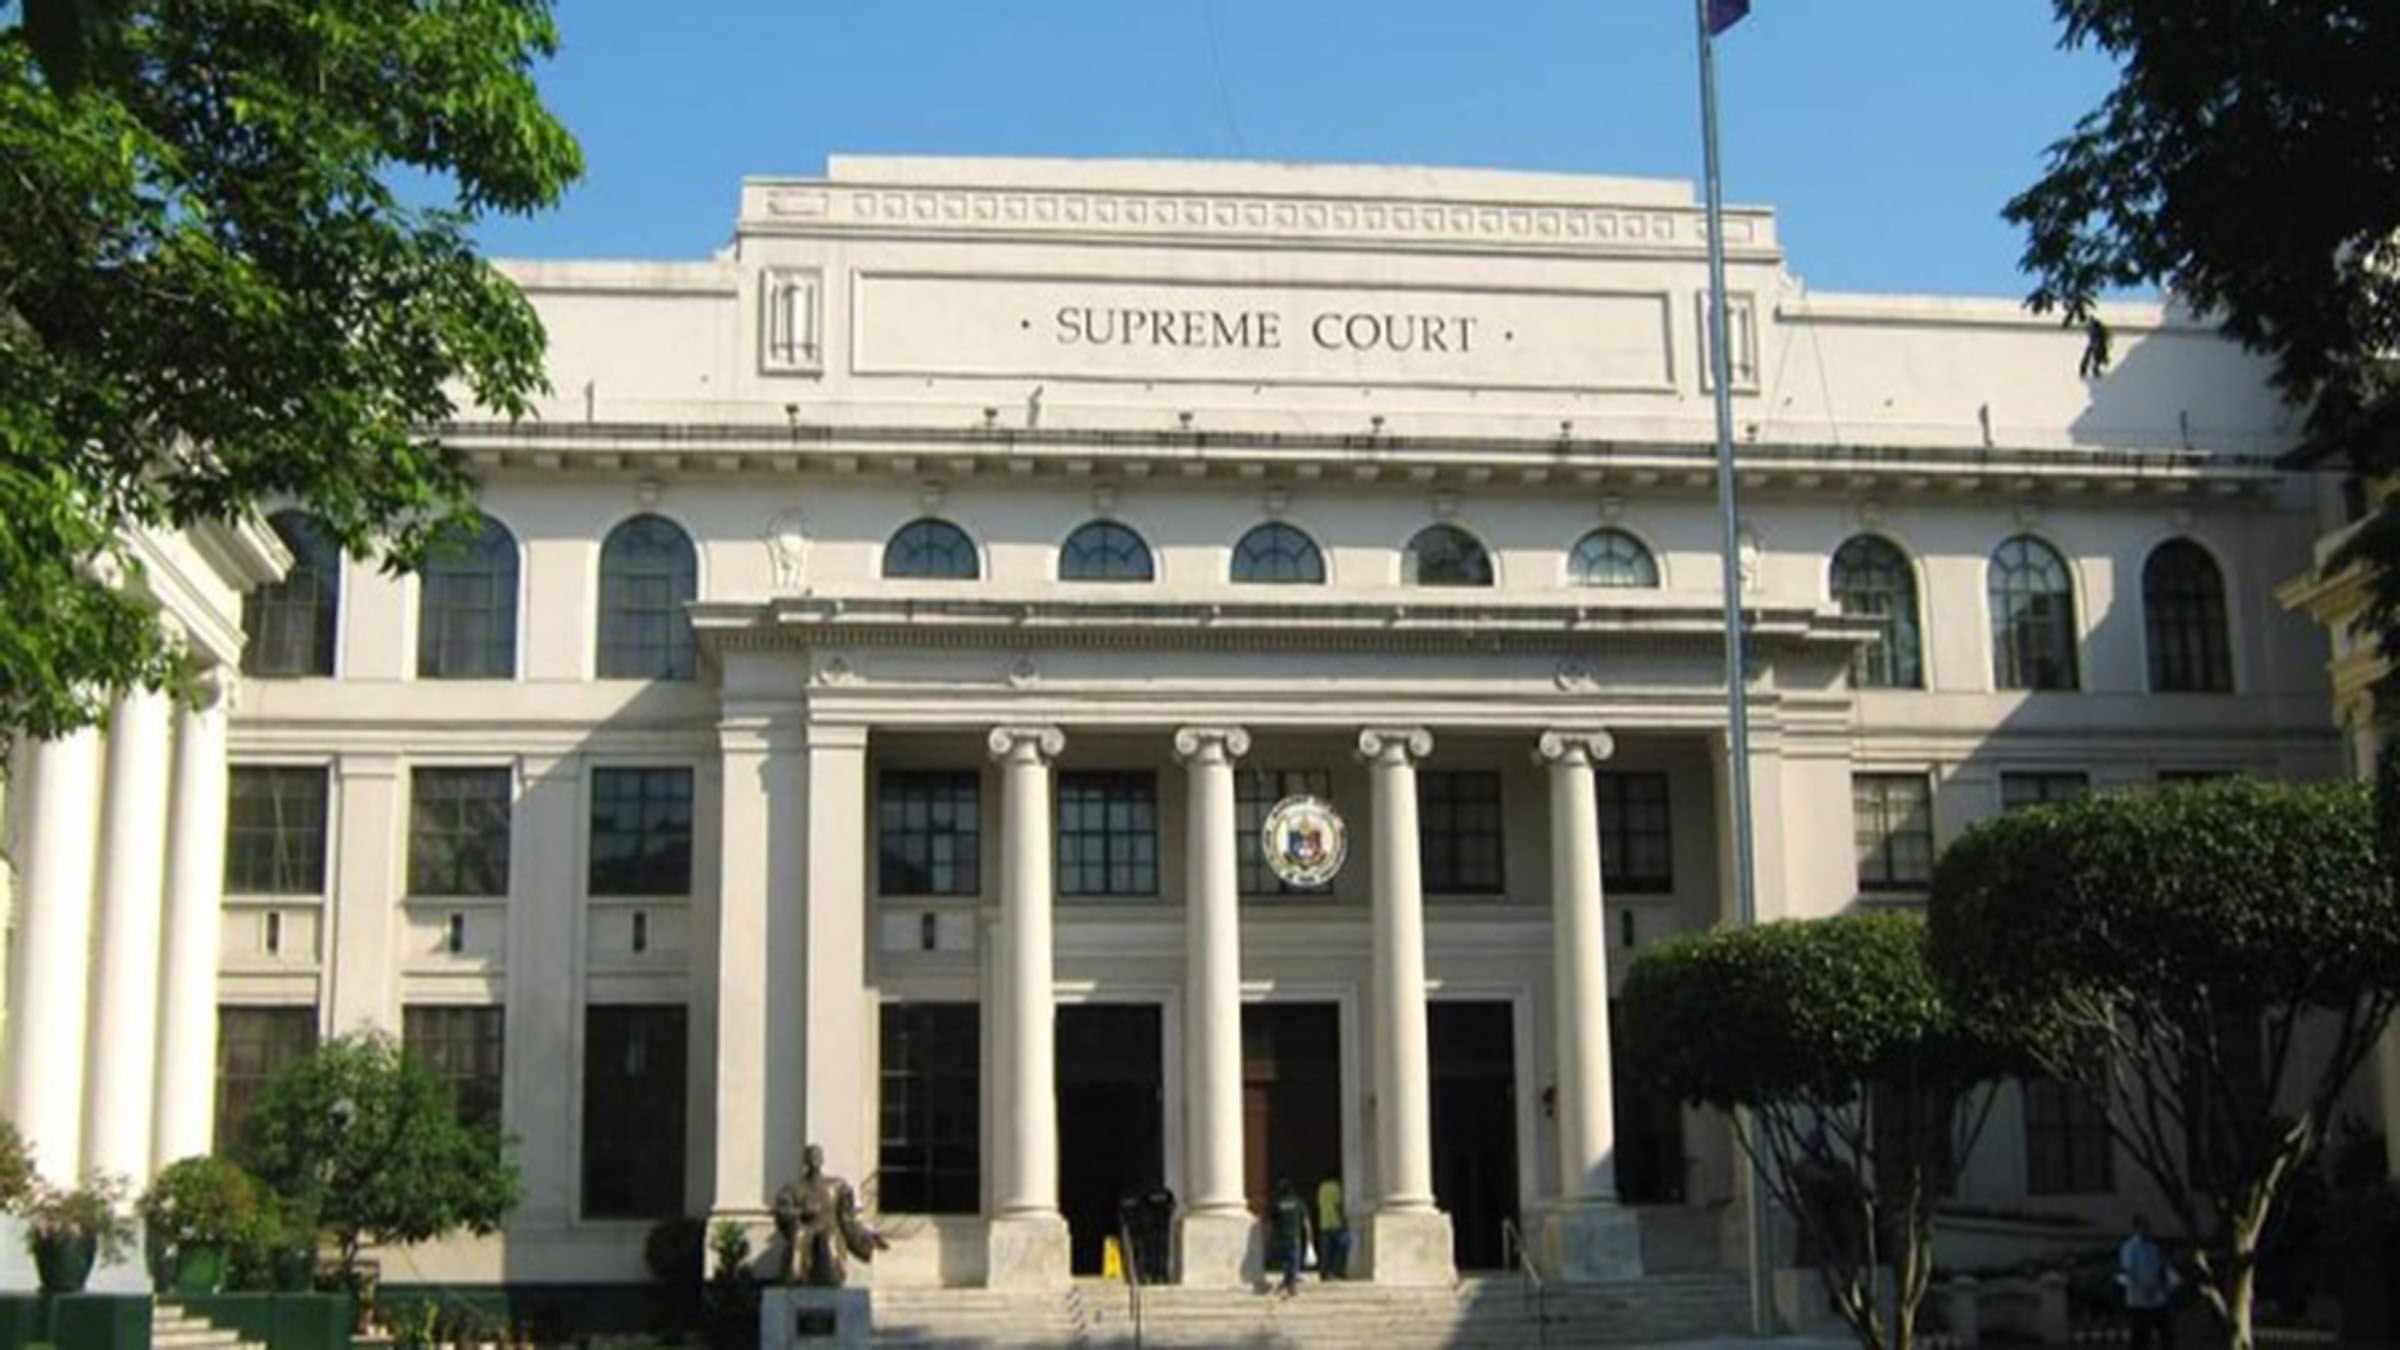 SC clears drug convict due to ‘mishandled’ evidence